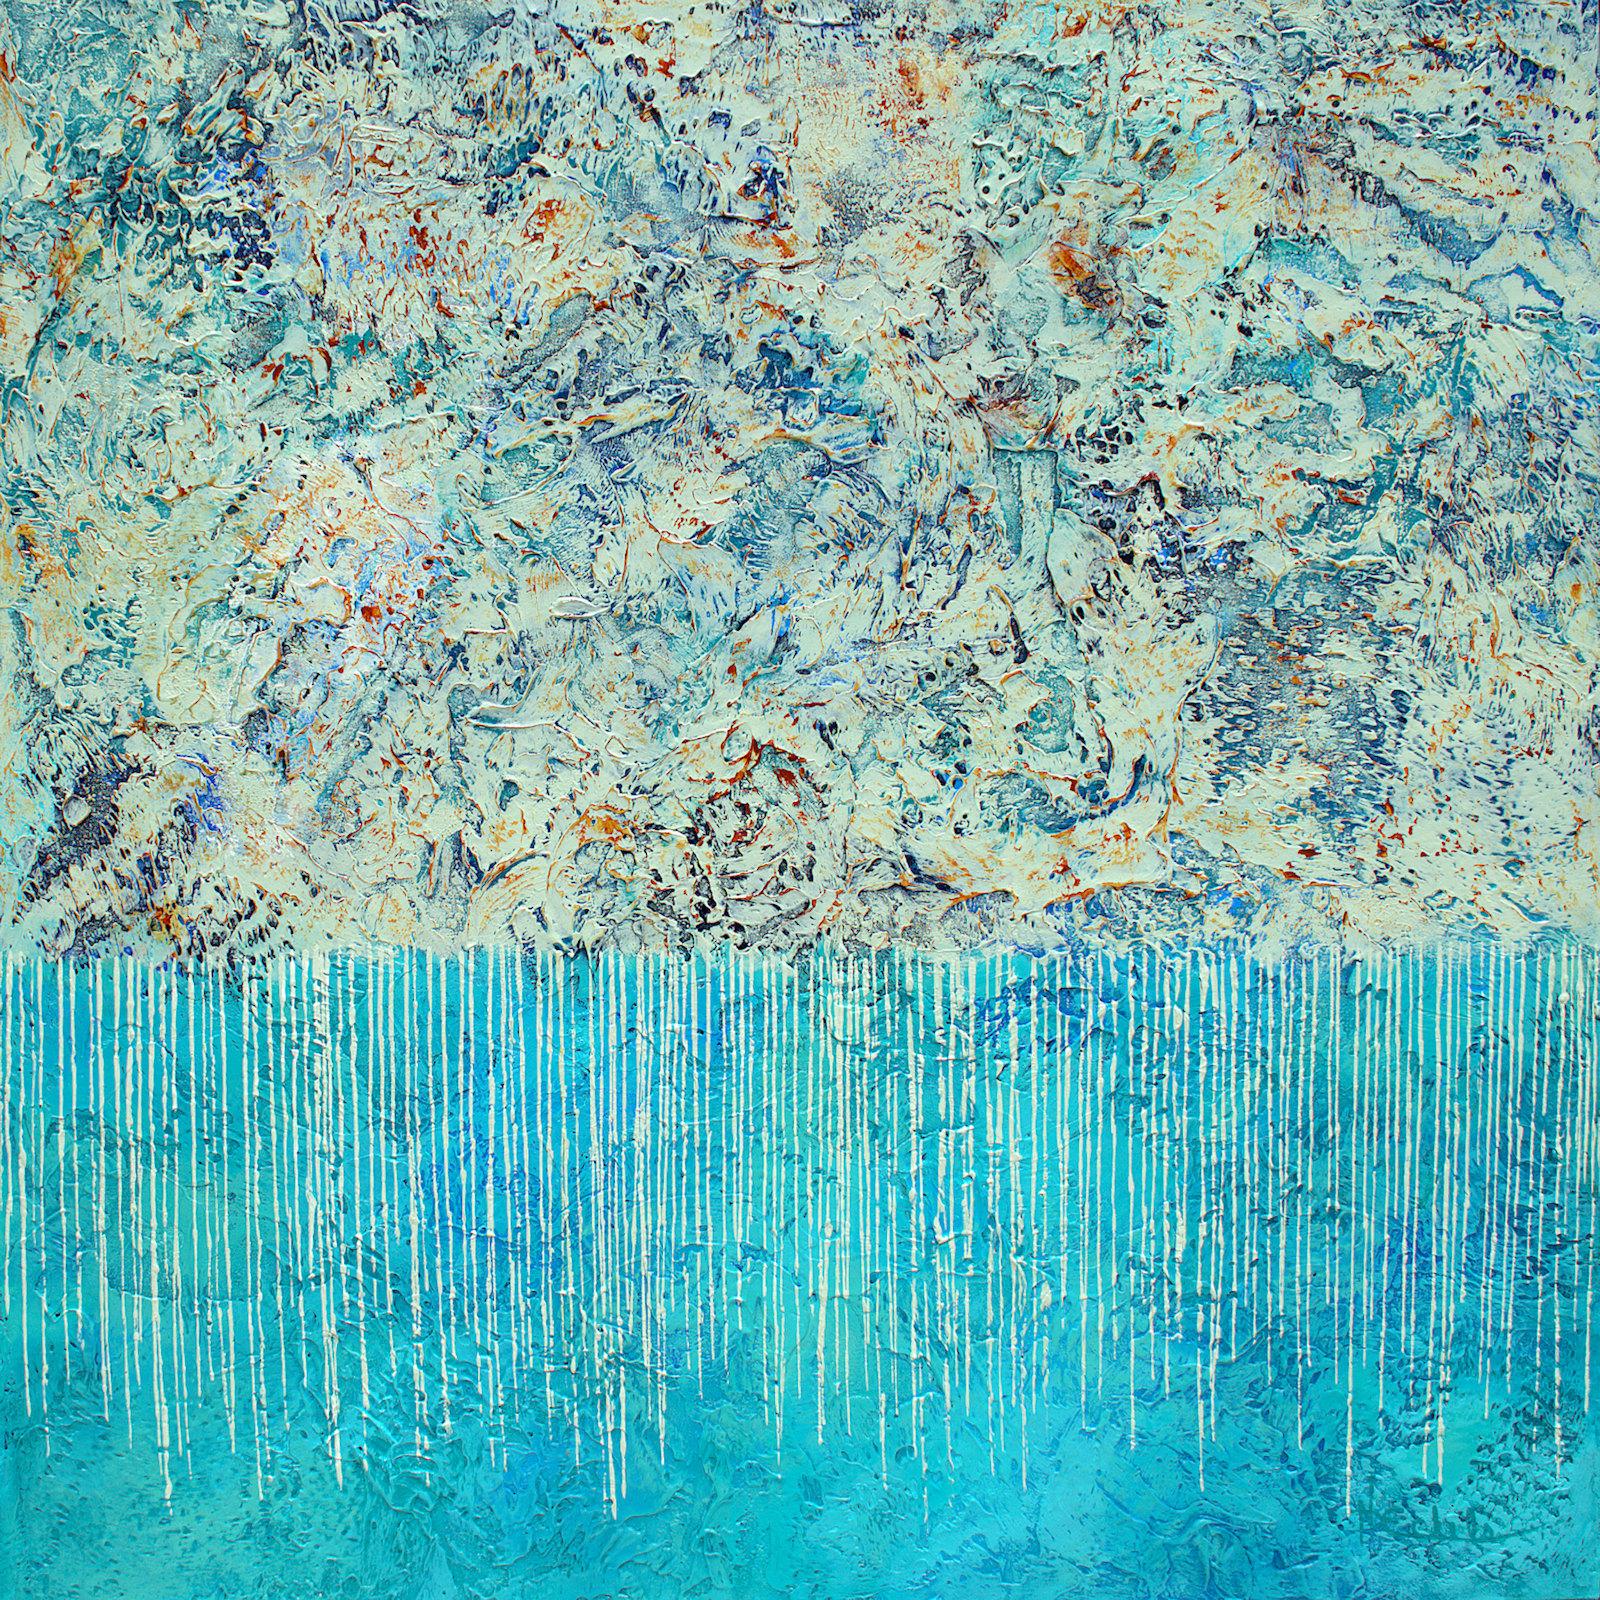 Nancy Eckels Abstract Painting - "Soothing" Mixed Media abstract with textural blues, teal, aqua and gray